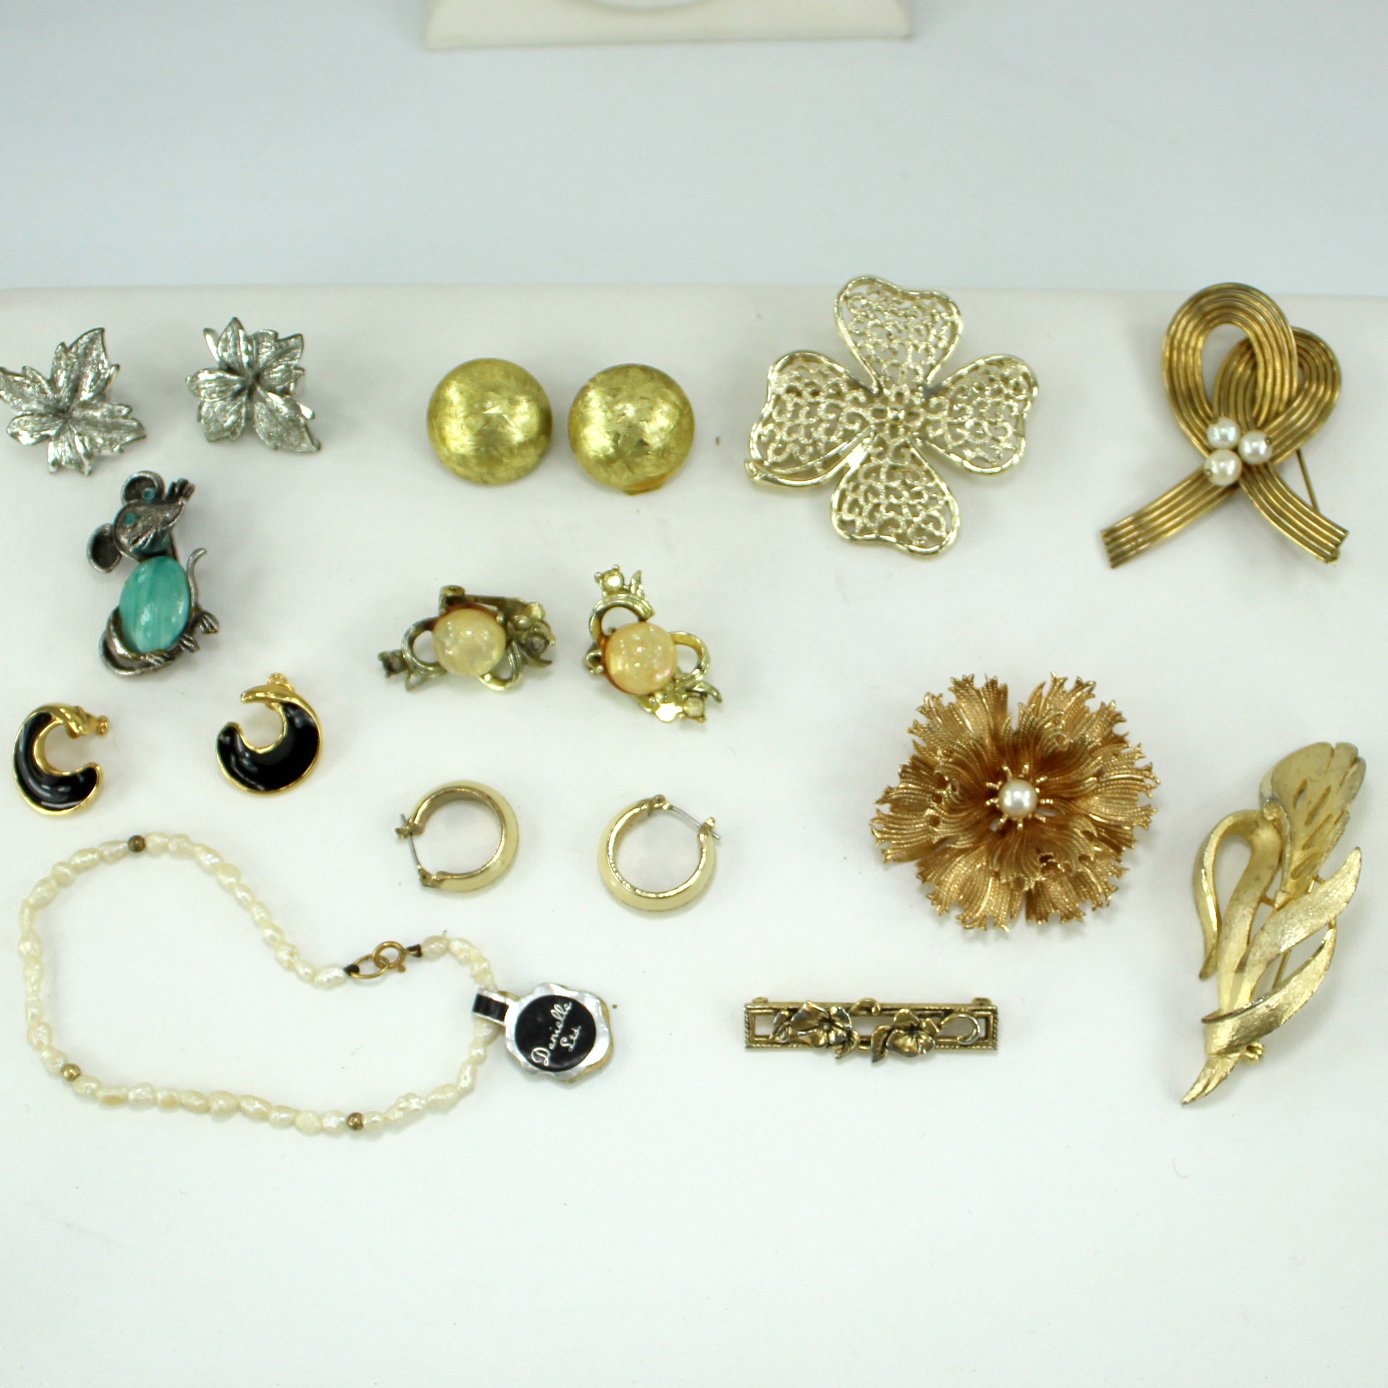 Lot Collection 25 Vintage Designer Signed Jewelry Necklaces Bracelets Pins Earrings new freshwater pearl blet  Coro earrings avon mouse